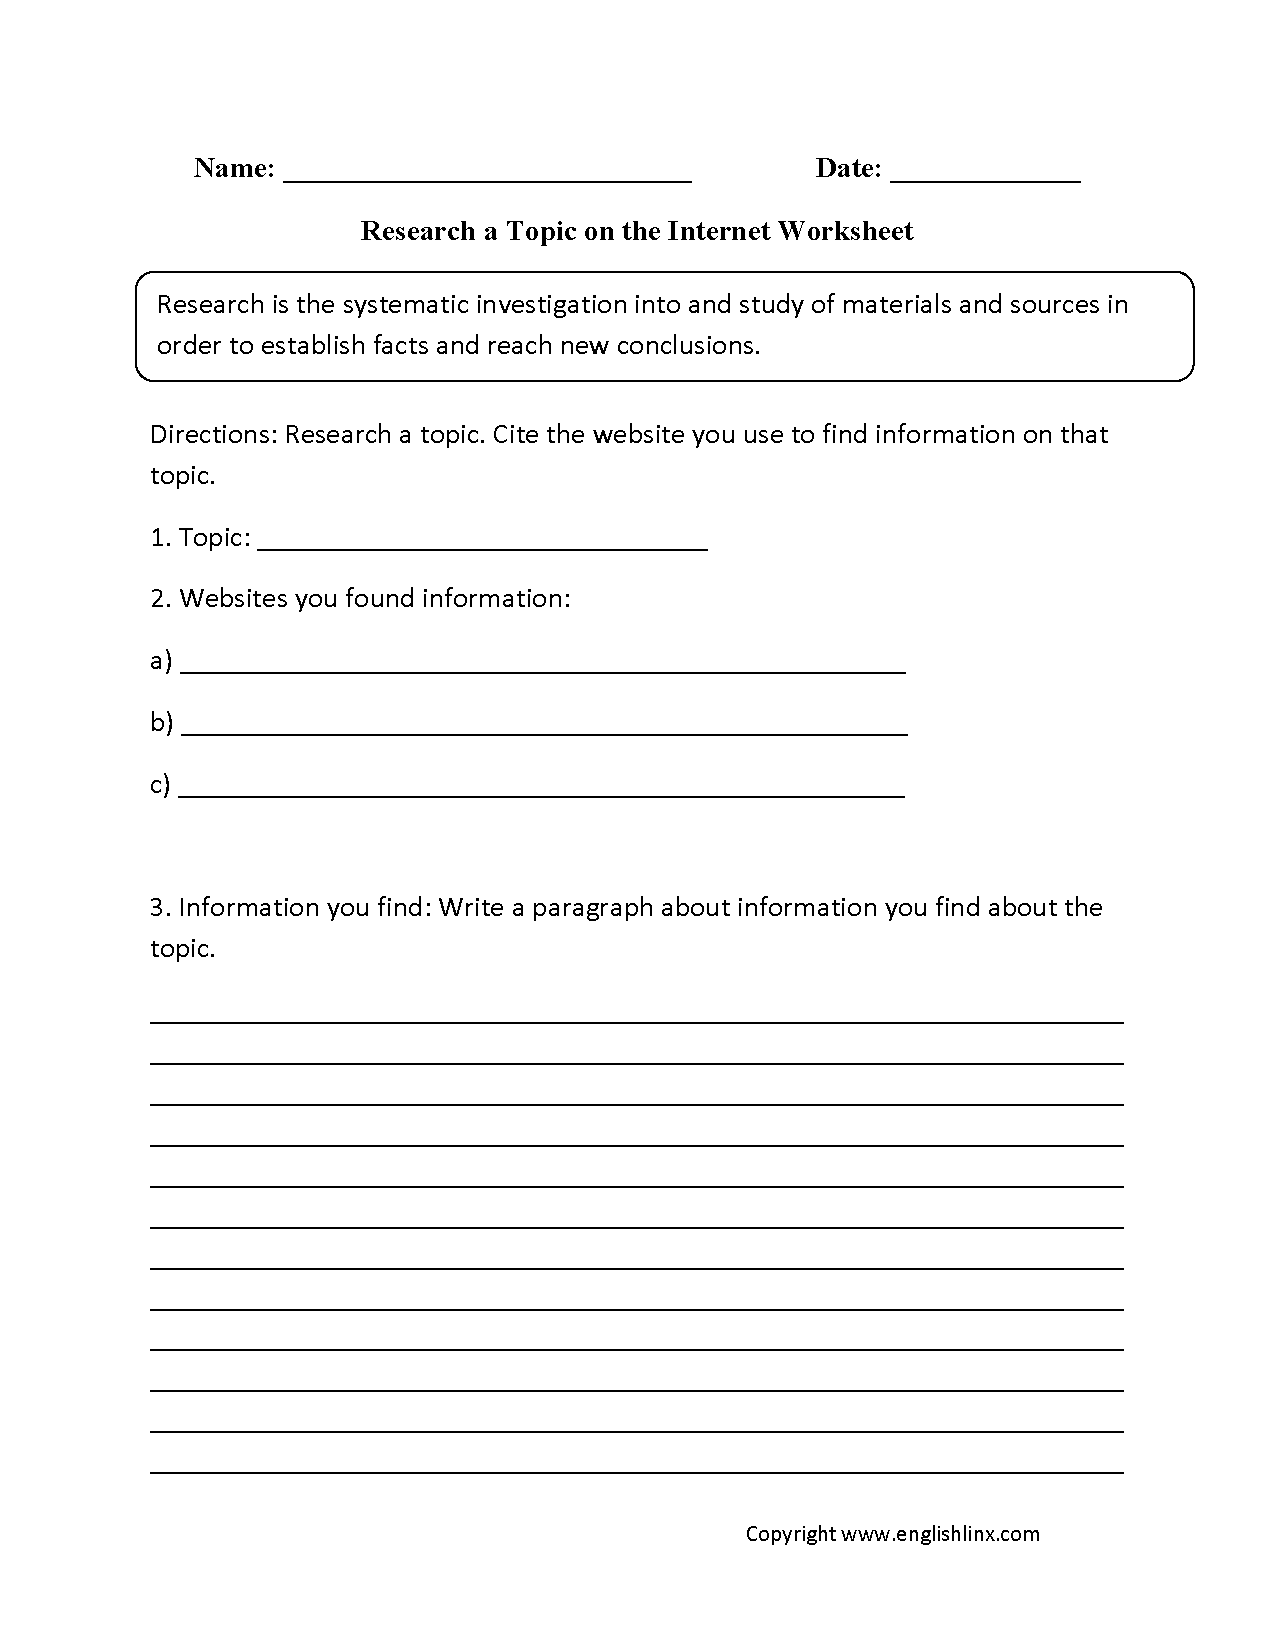 Research a Topic on the Internet Worksheet